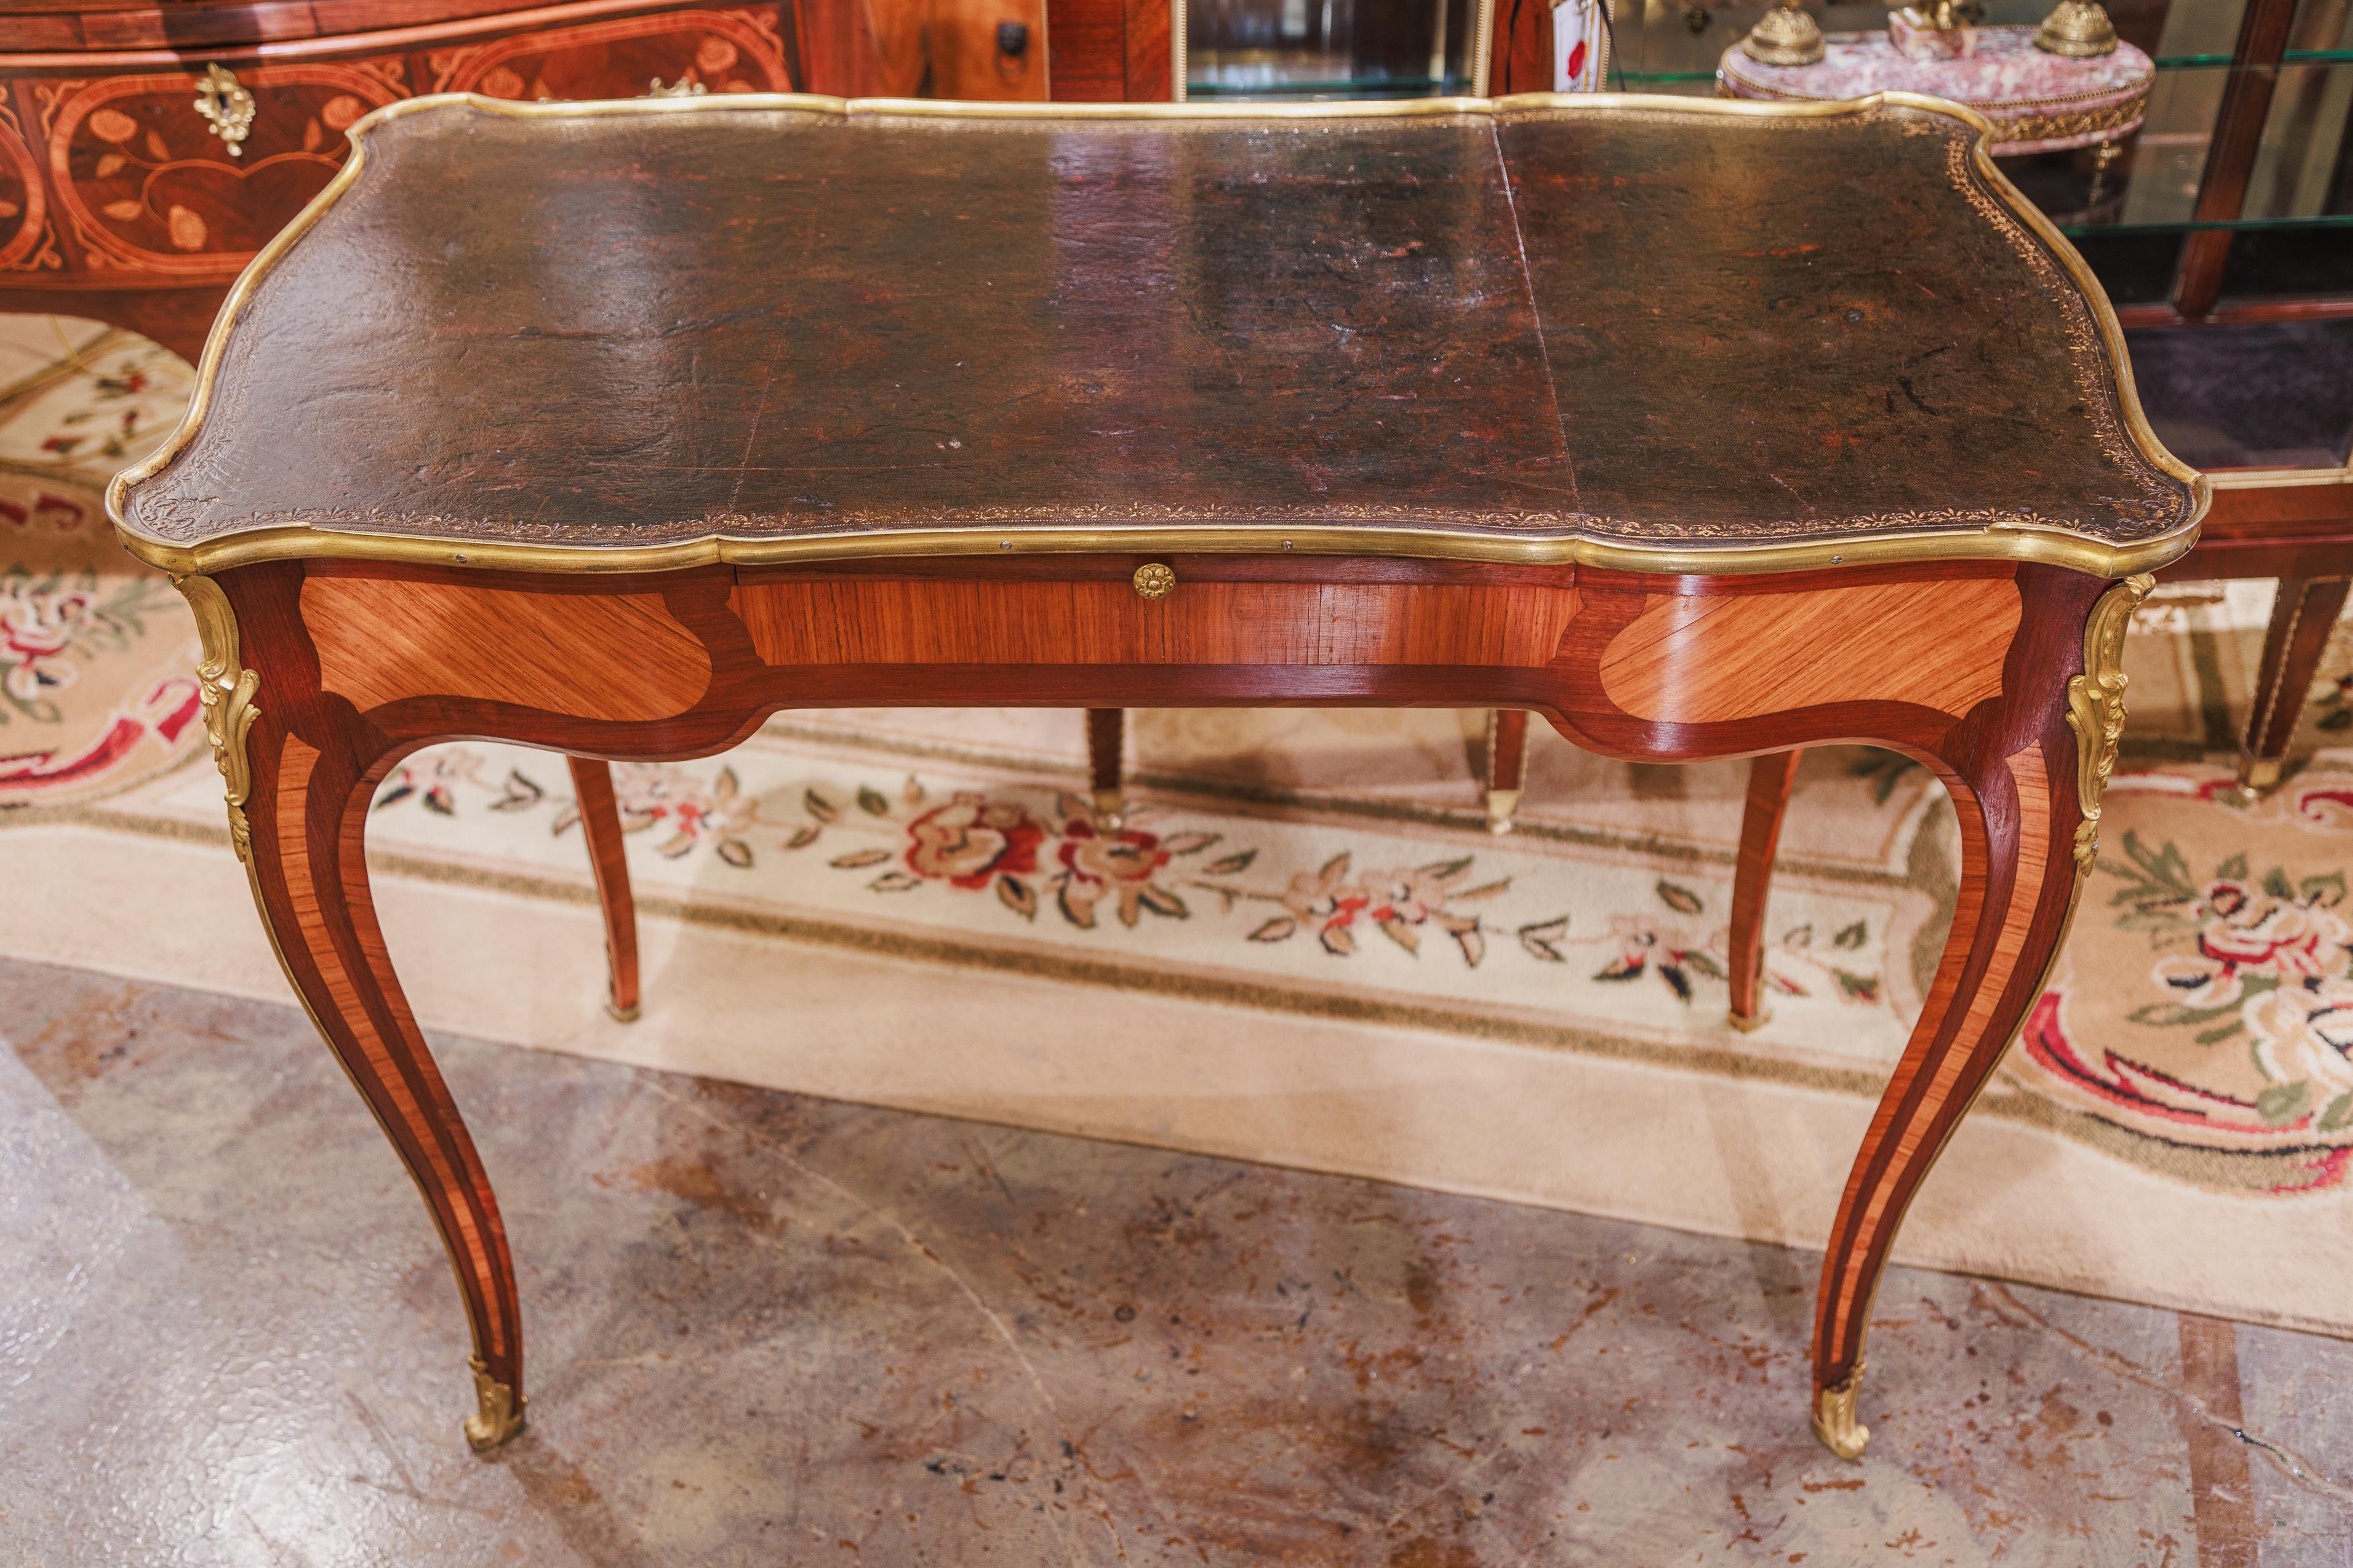 Gilt A fine 19th c  French Louis XV writing desk signed A . Beurdeley For Sale